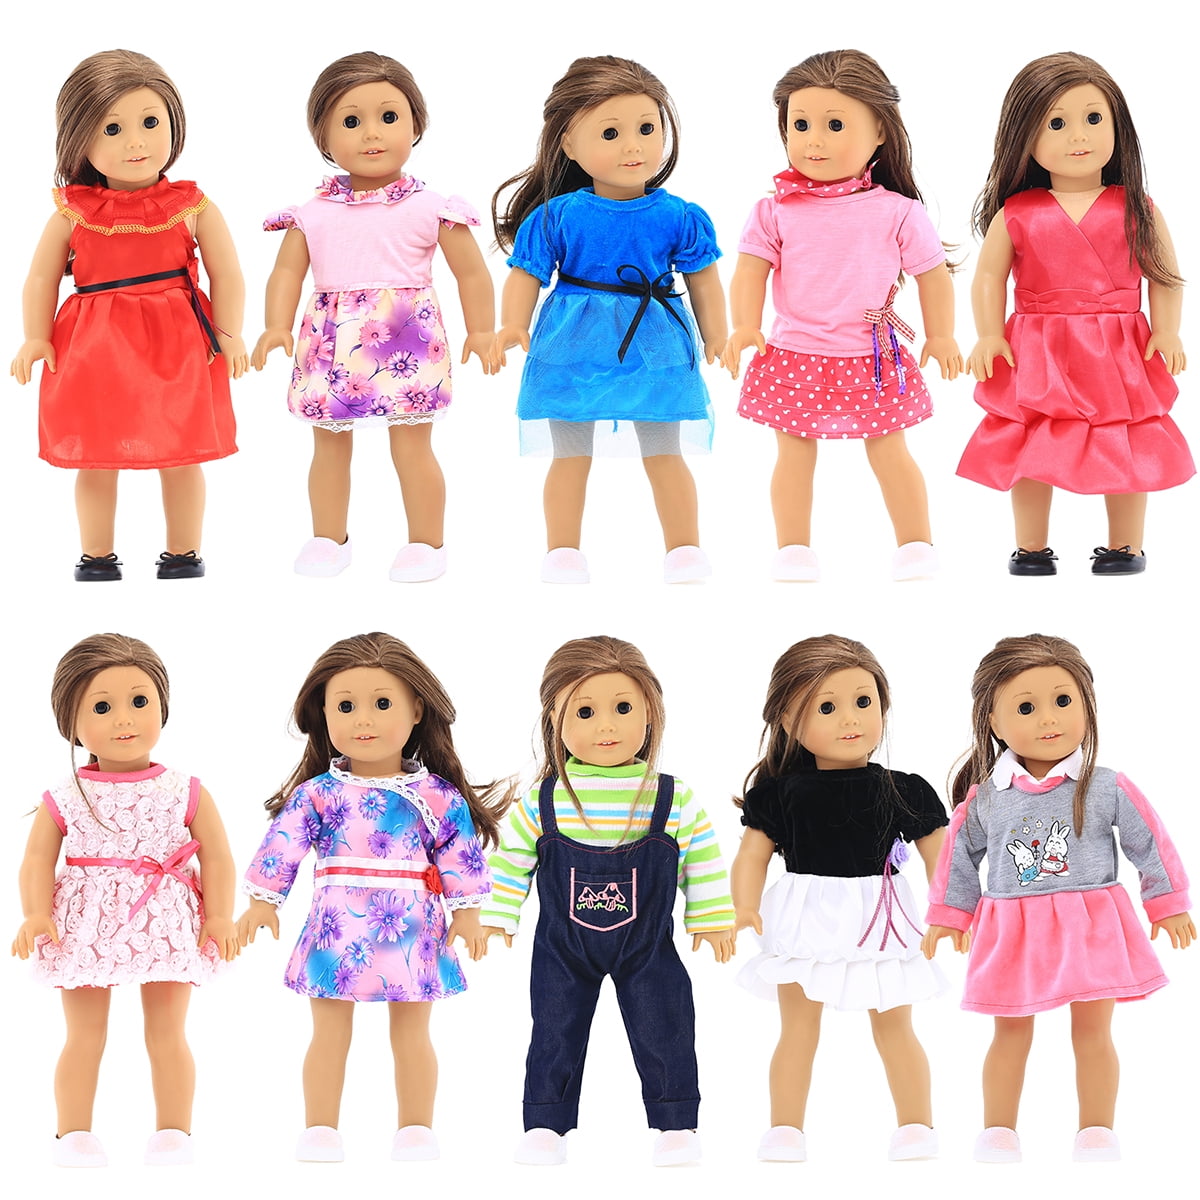 Hot Handmade 18" Inch American Girl Doll Accessories Doll Princess Dress Shoes 